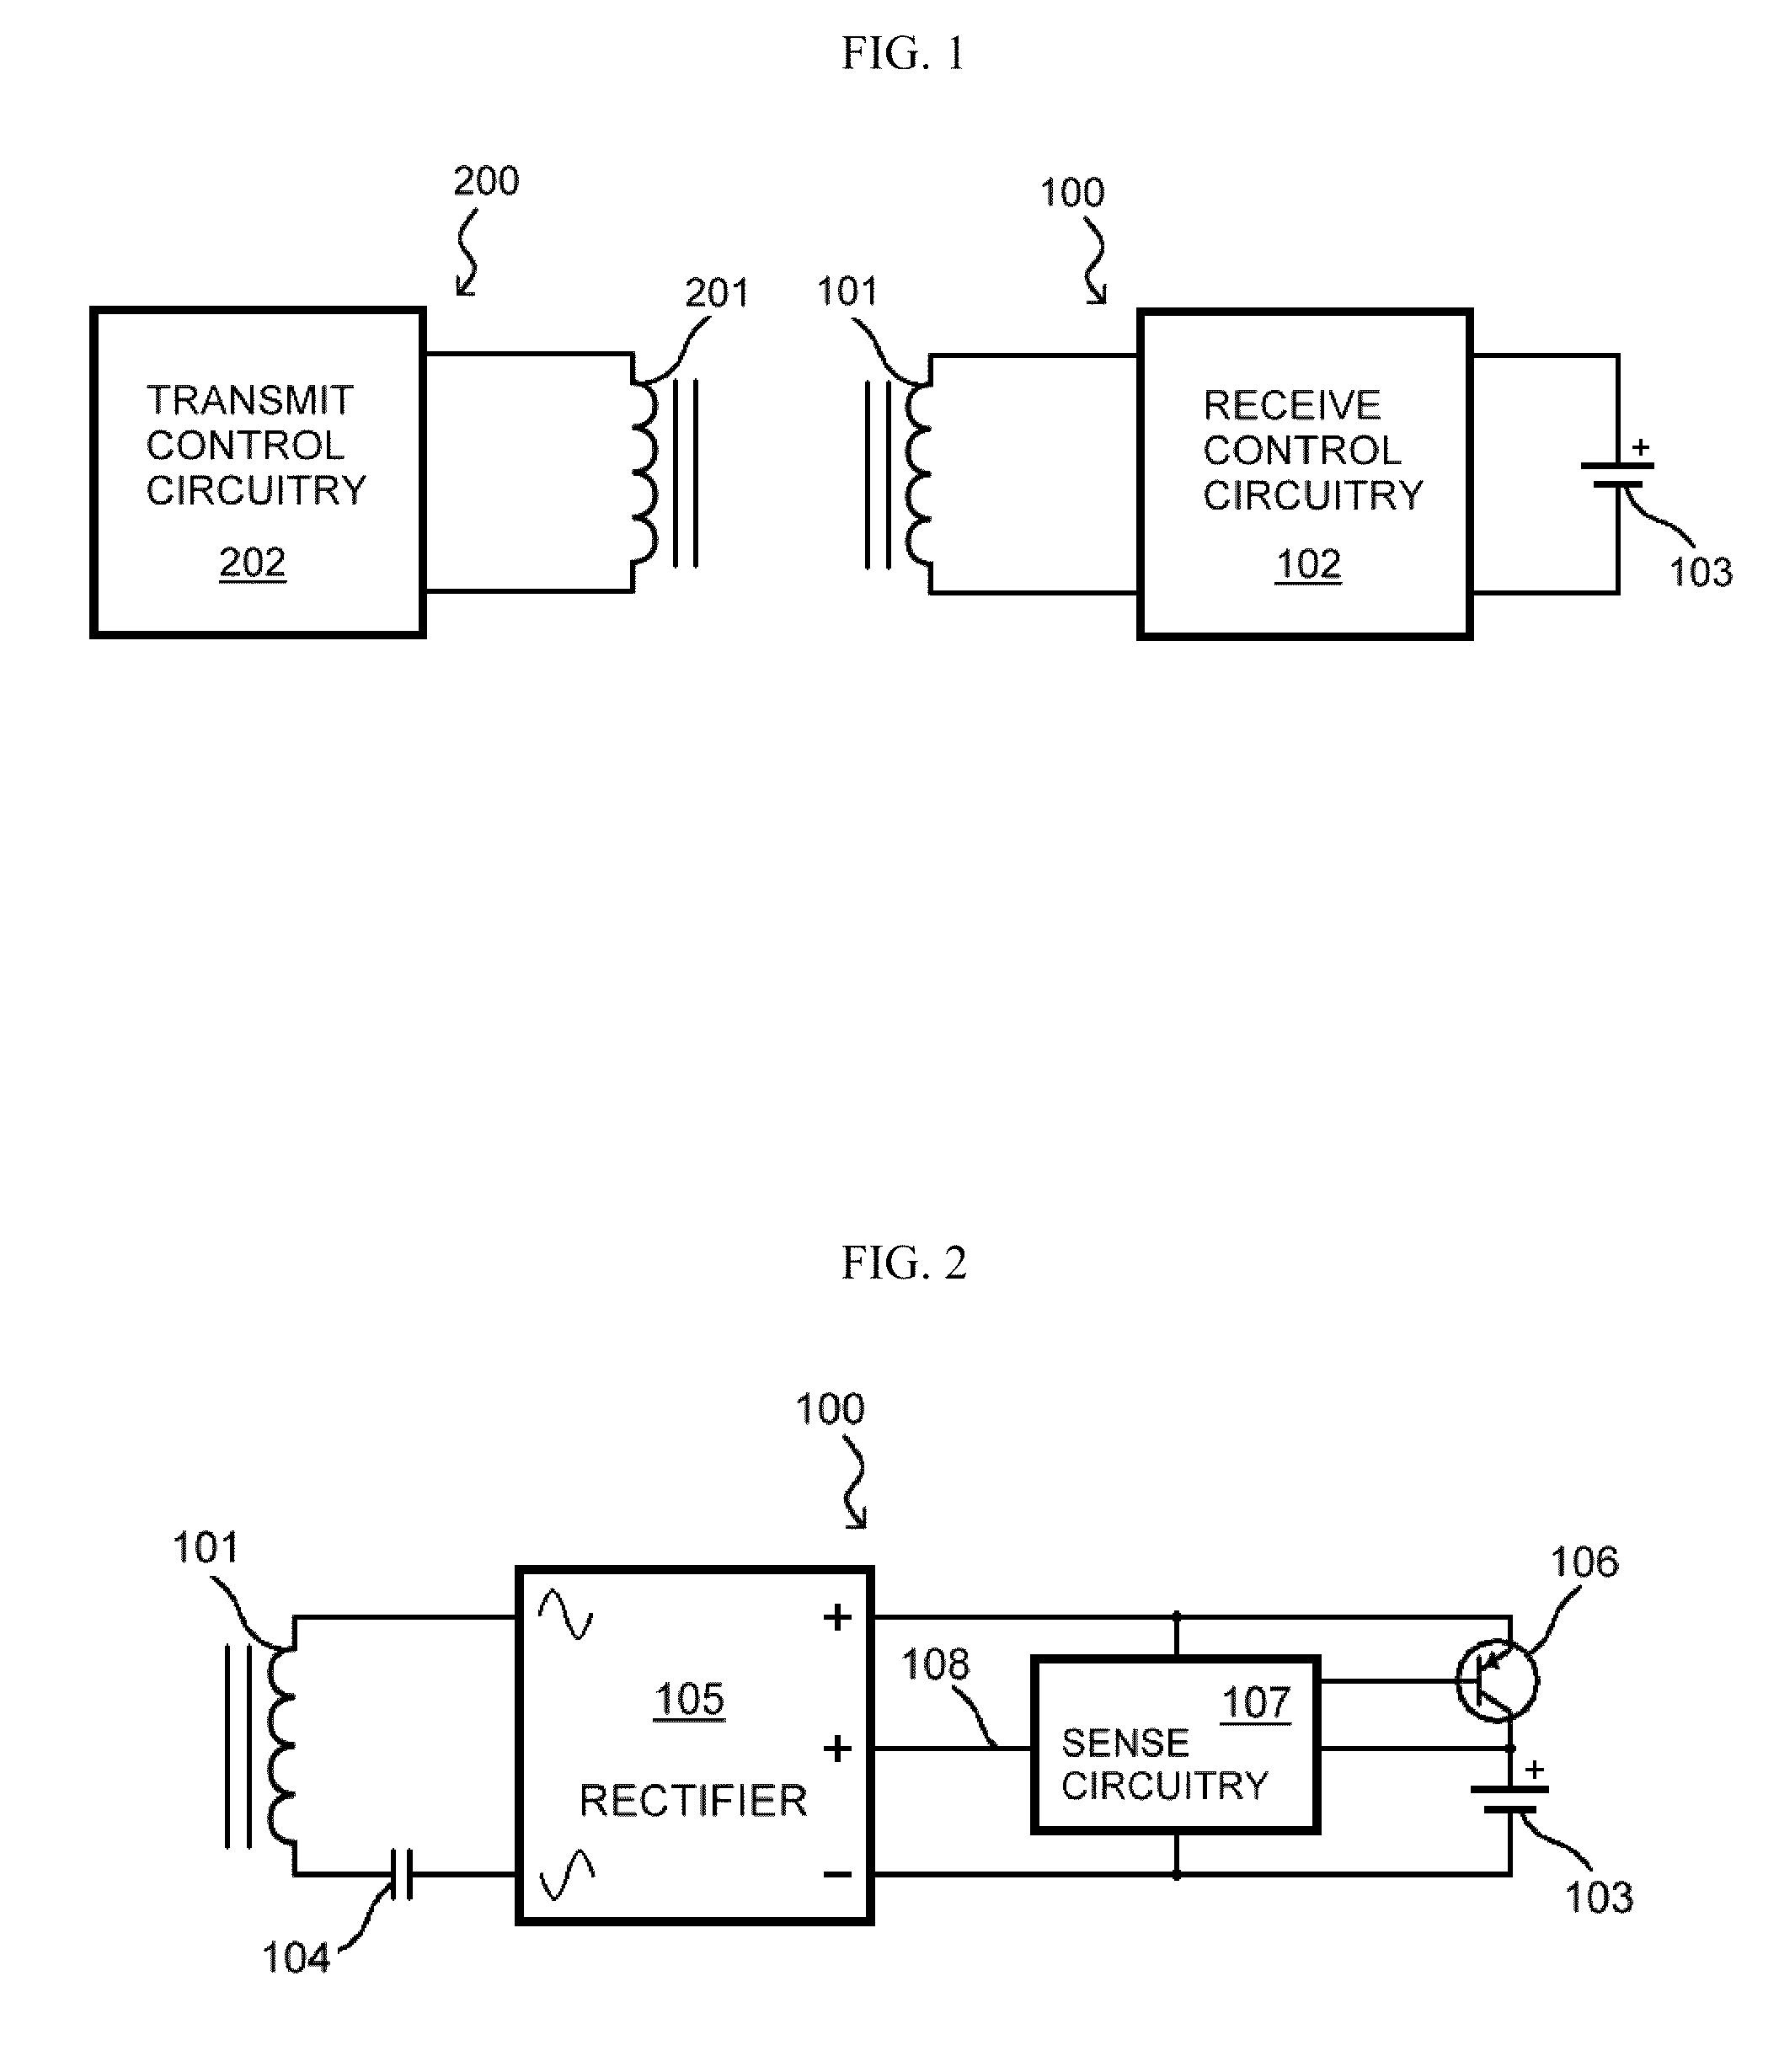 Systems and methods for maintaining a drive signal to a resonant circuit at a resonant frequency